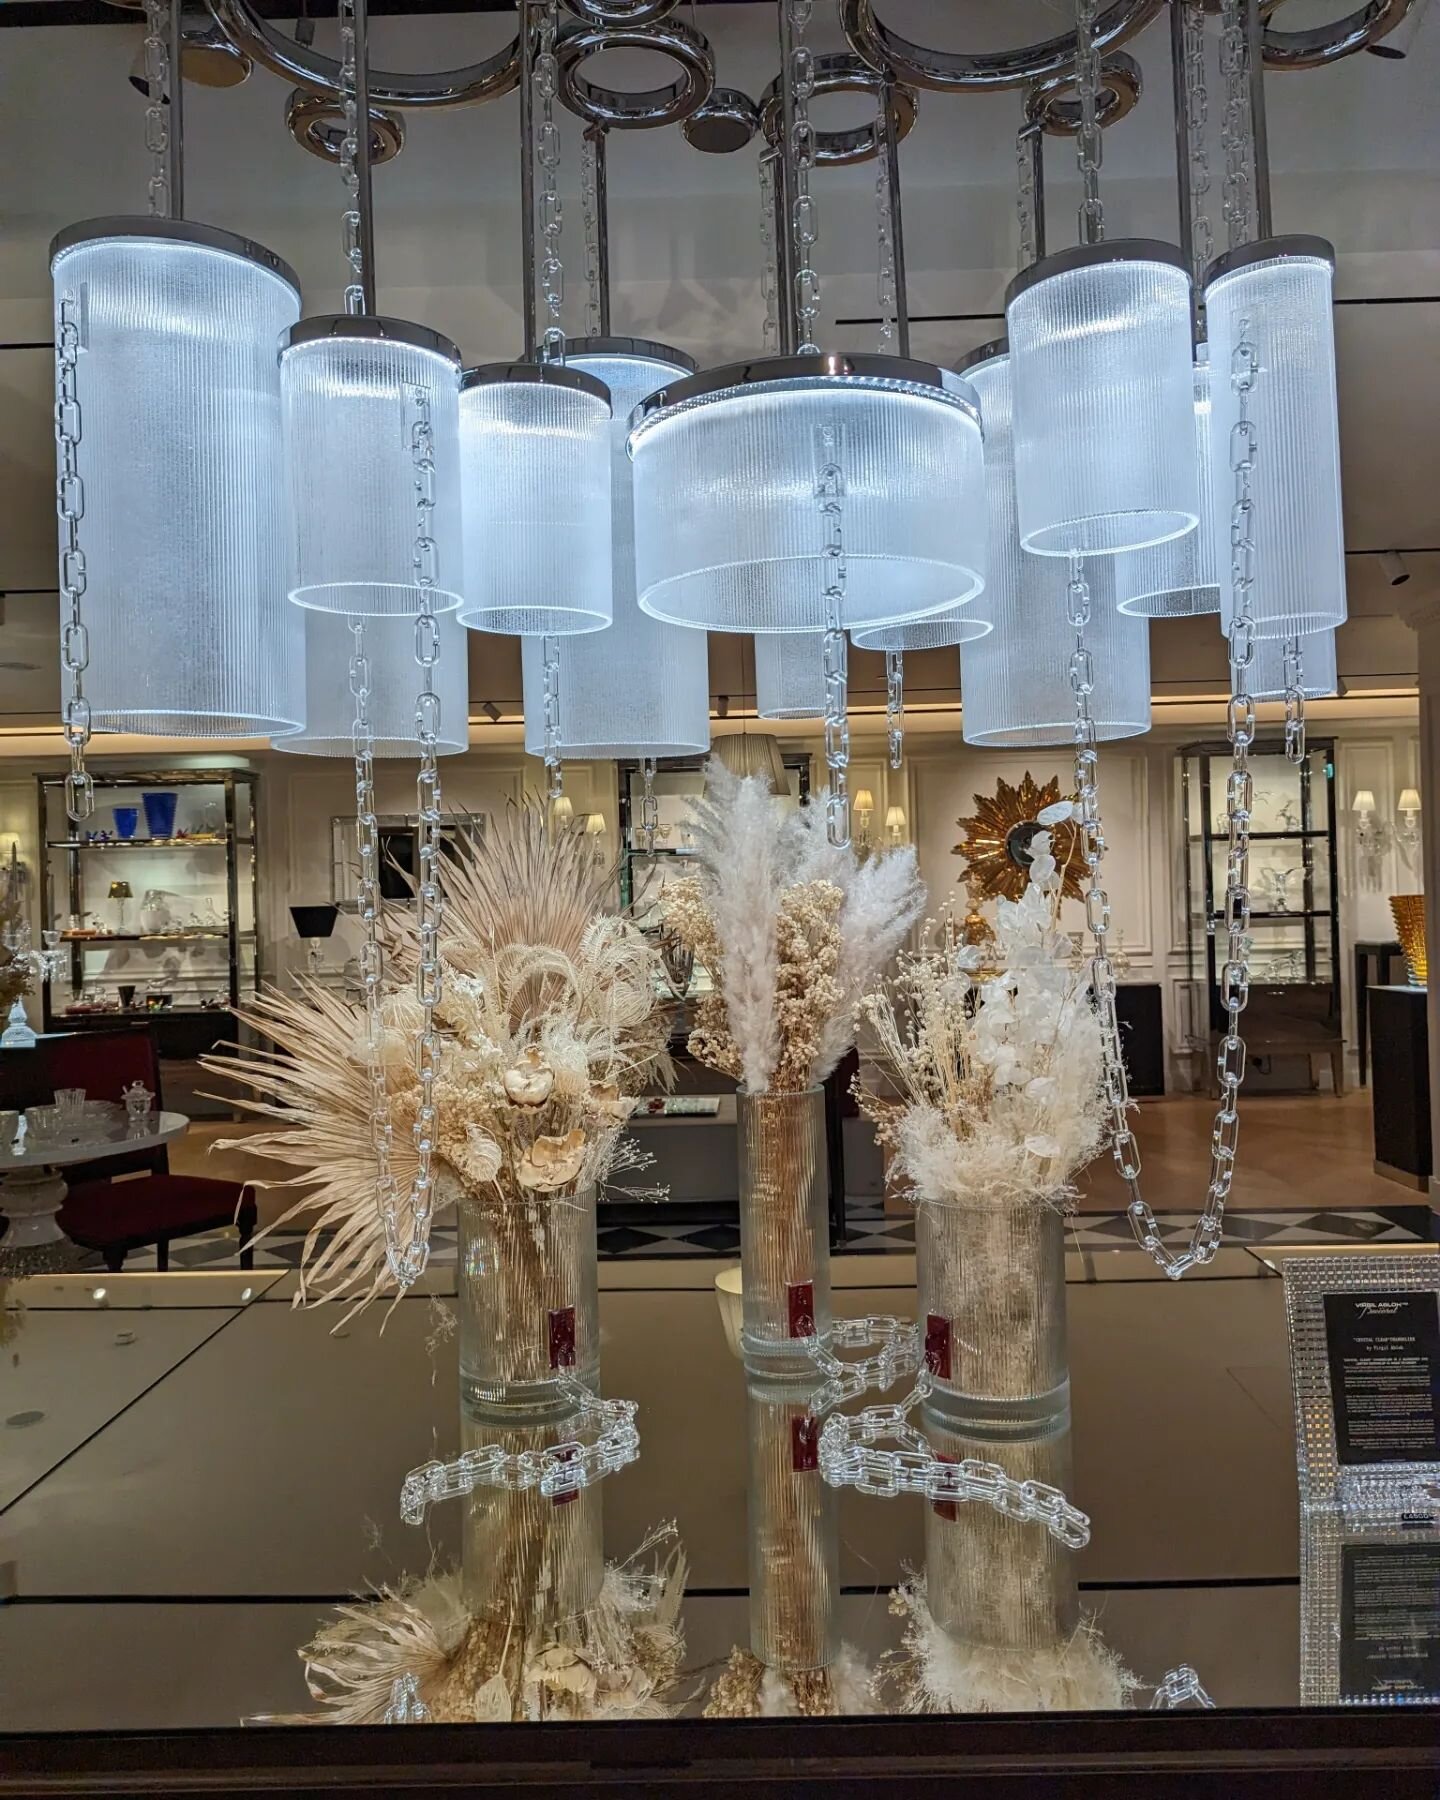 Let's discover the Limited Edition crystal chandelier as well as vases designed by Virgil Abloh at the Baccarat store in Harrods, London.

A piece of art, a mix of heritage and modernity, of elegance and industrial codes,
The &ldquo;Crystal Clear&rdq